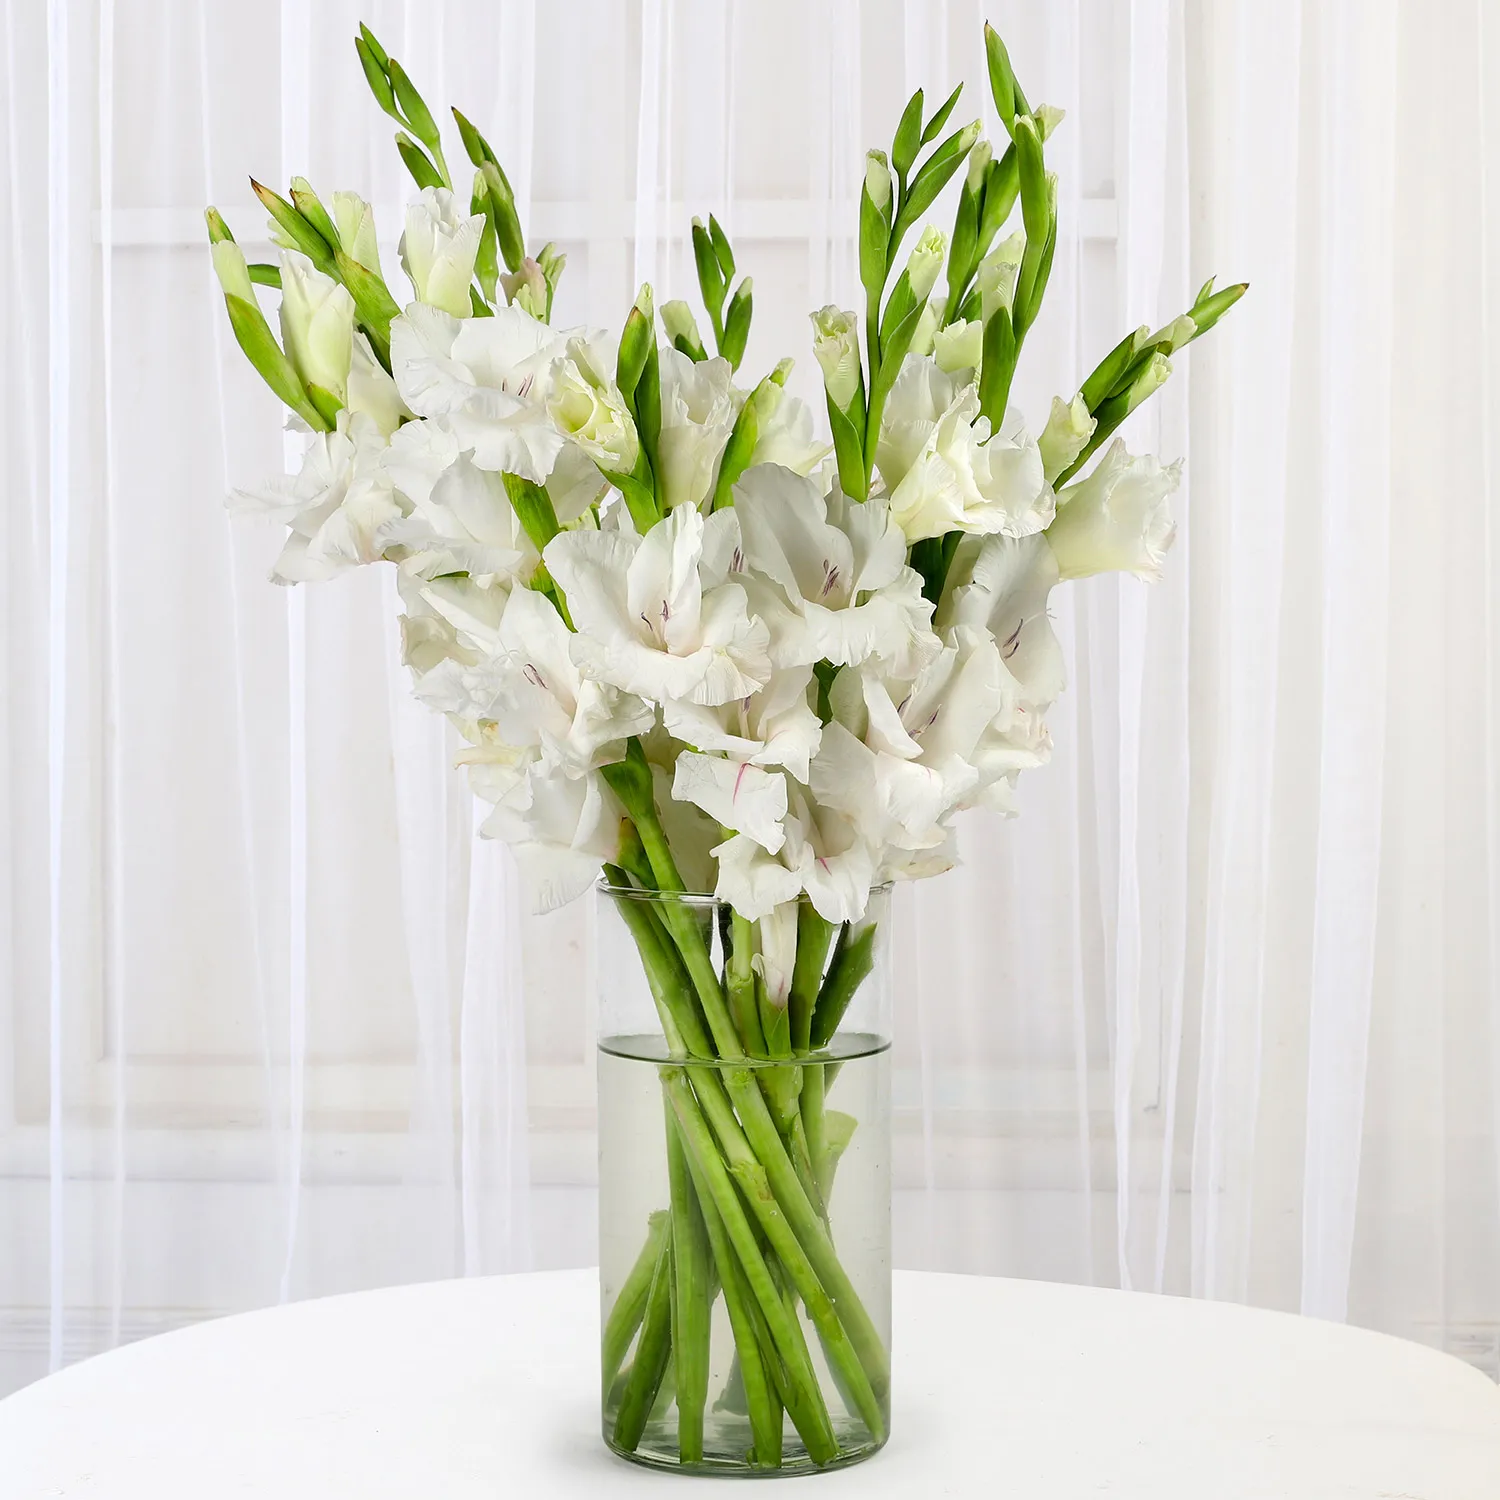 The best container for gladioli is a heavy vase like ceramic or glass, vase height should be one third the total length of the flowers.